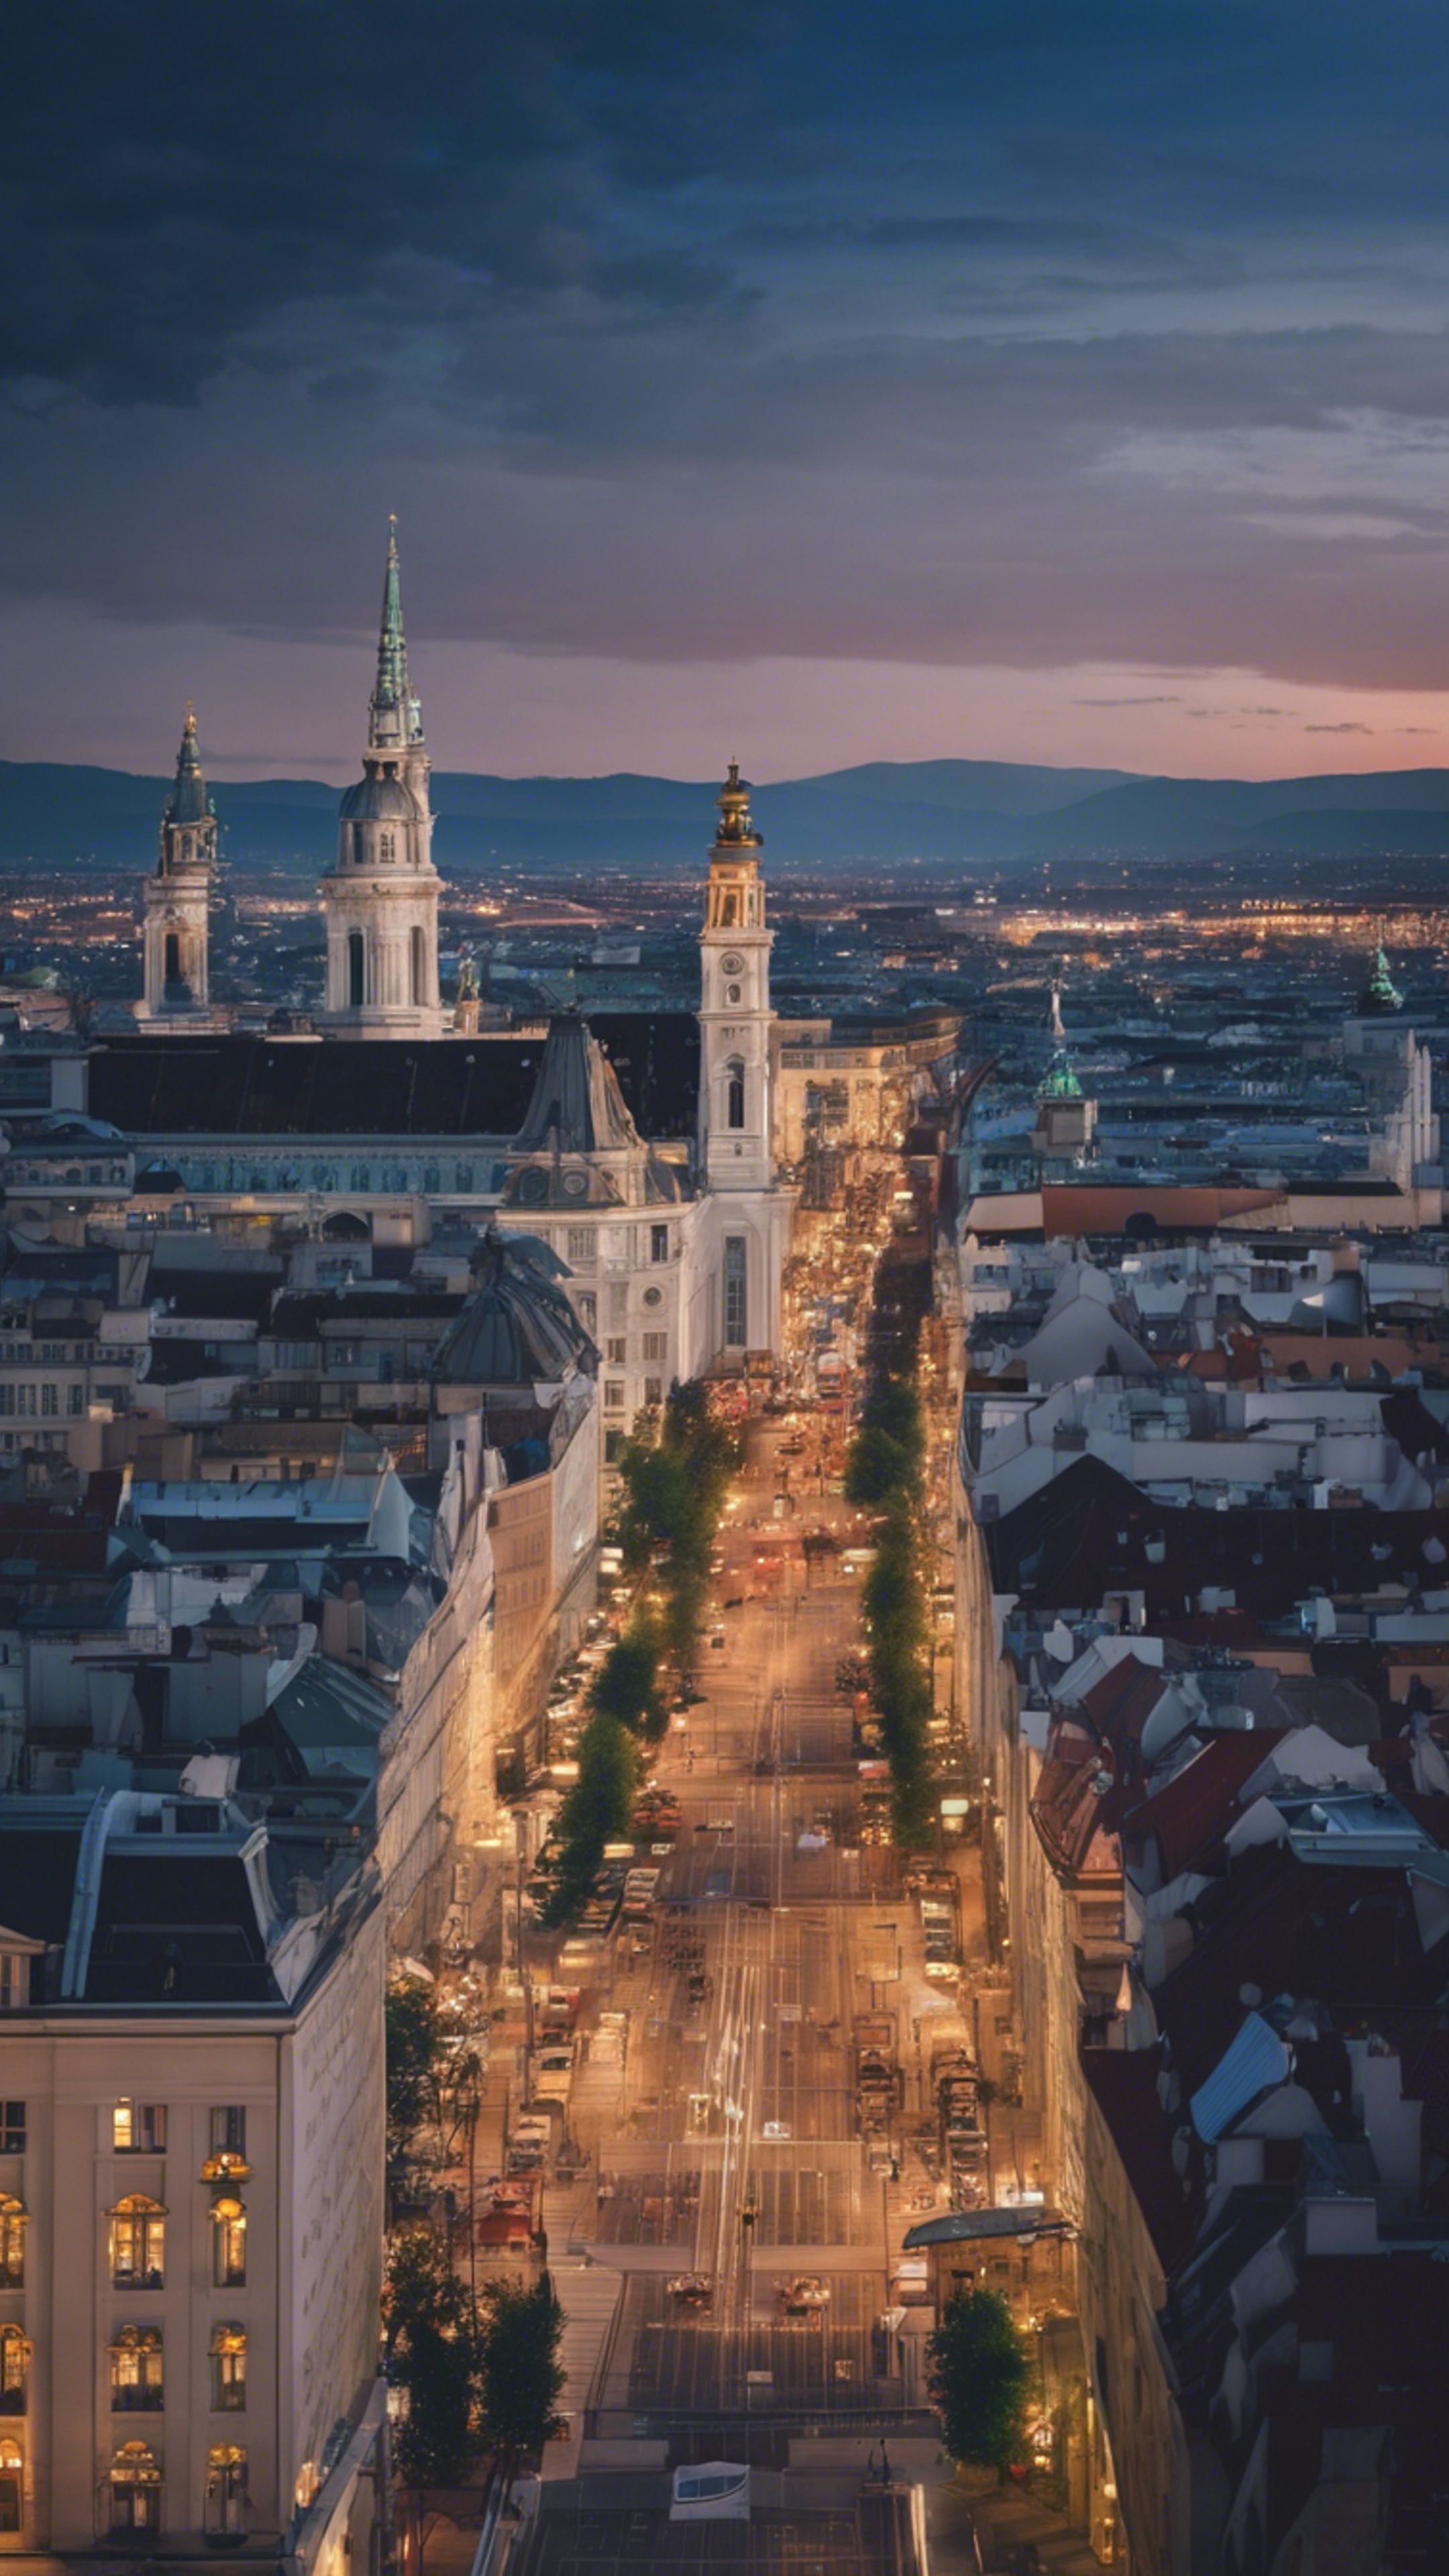 The panoramic skyline of Vienna captured at the exquisite blue hour.壁紙[24eb92fcc5fd45399446]